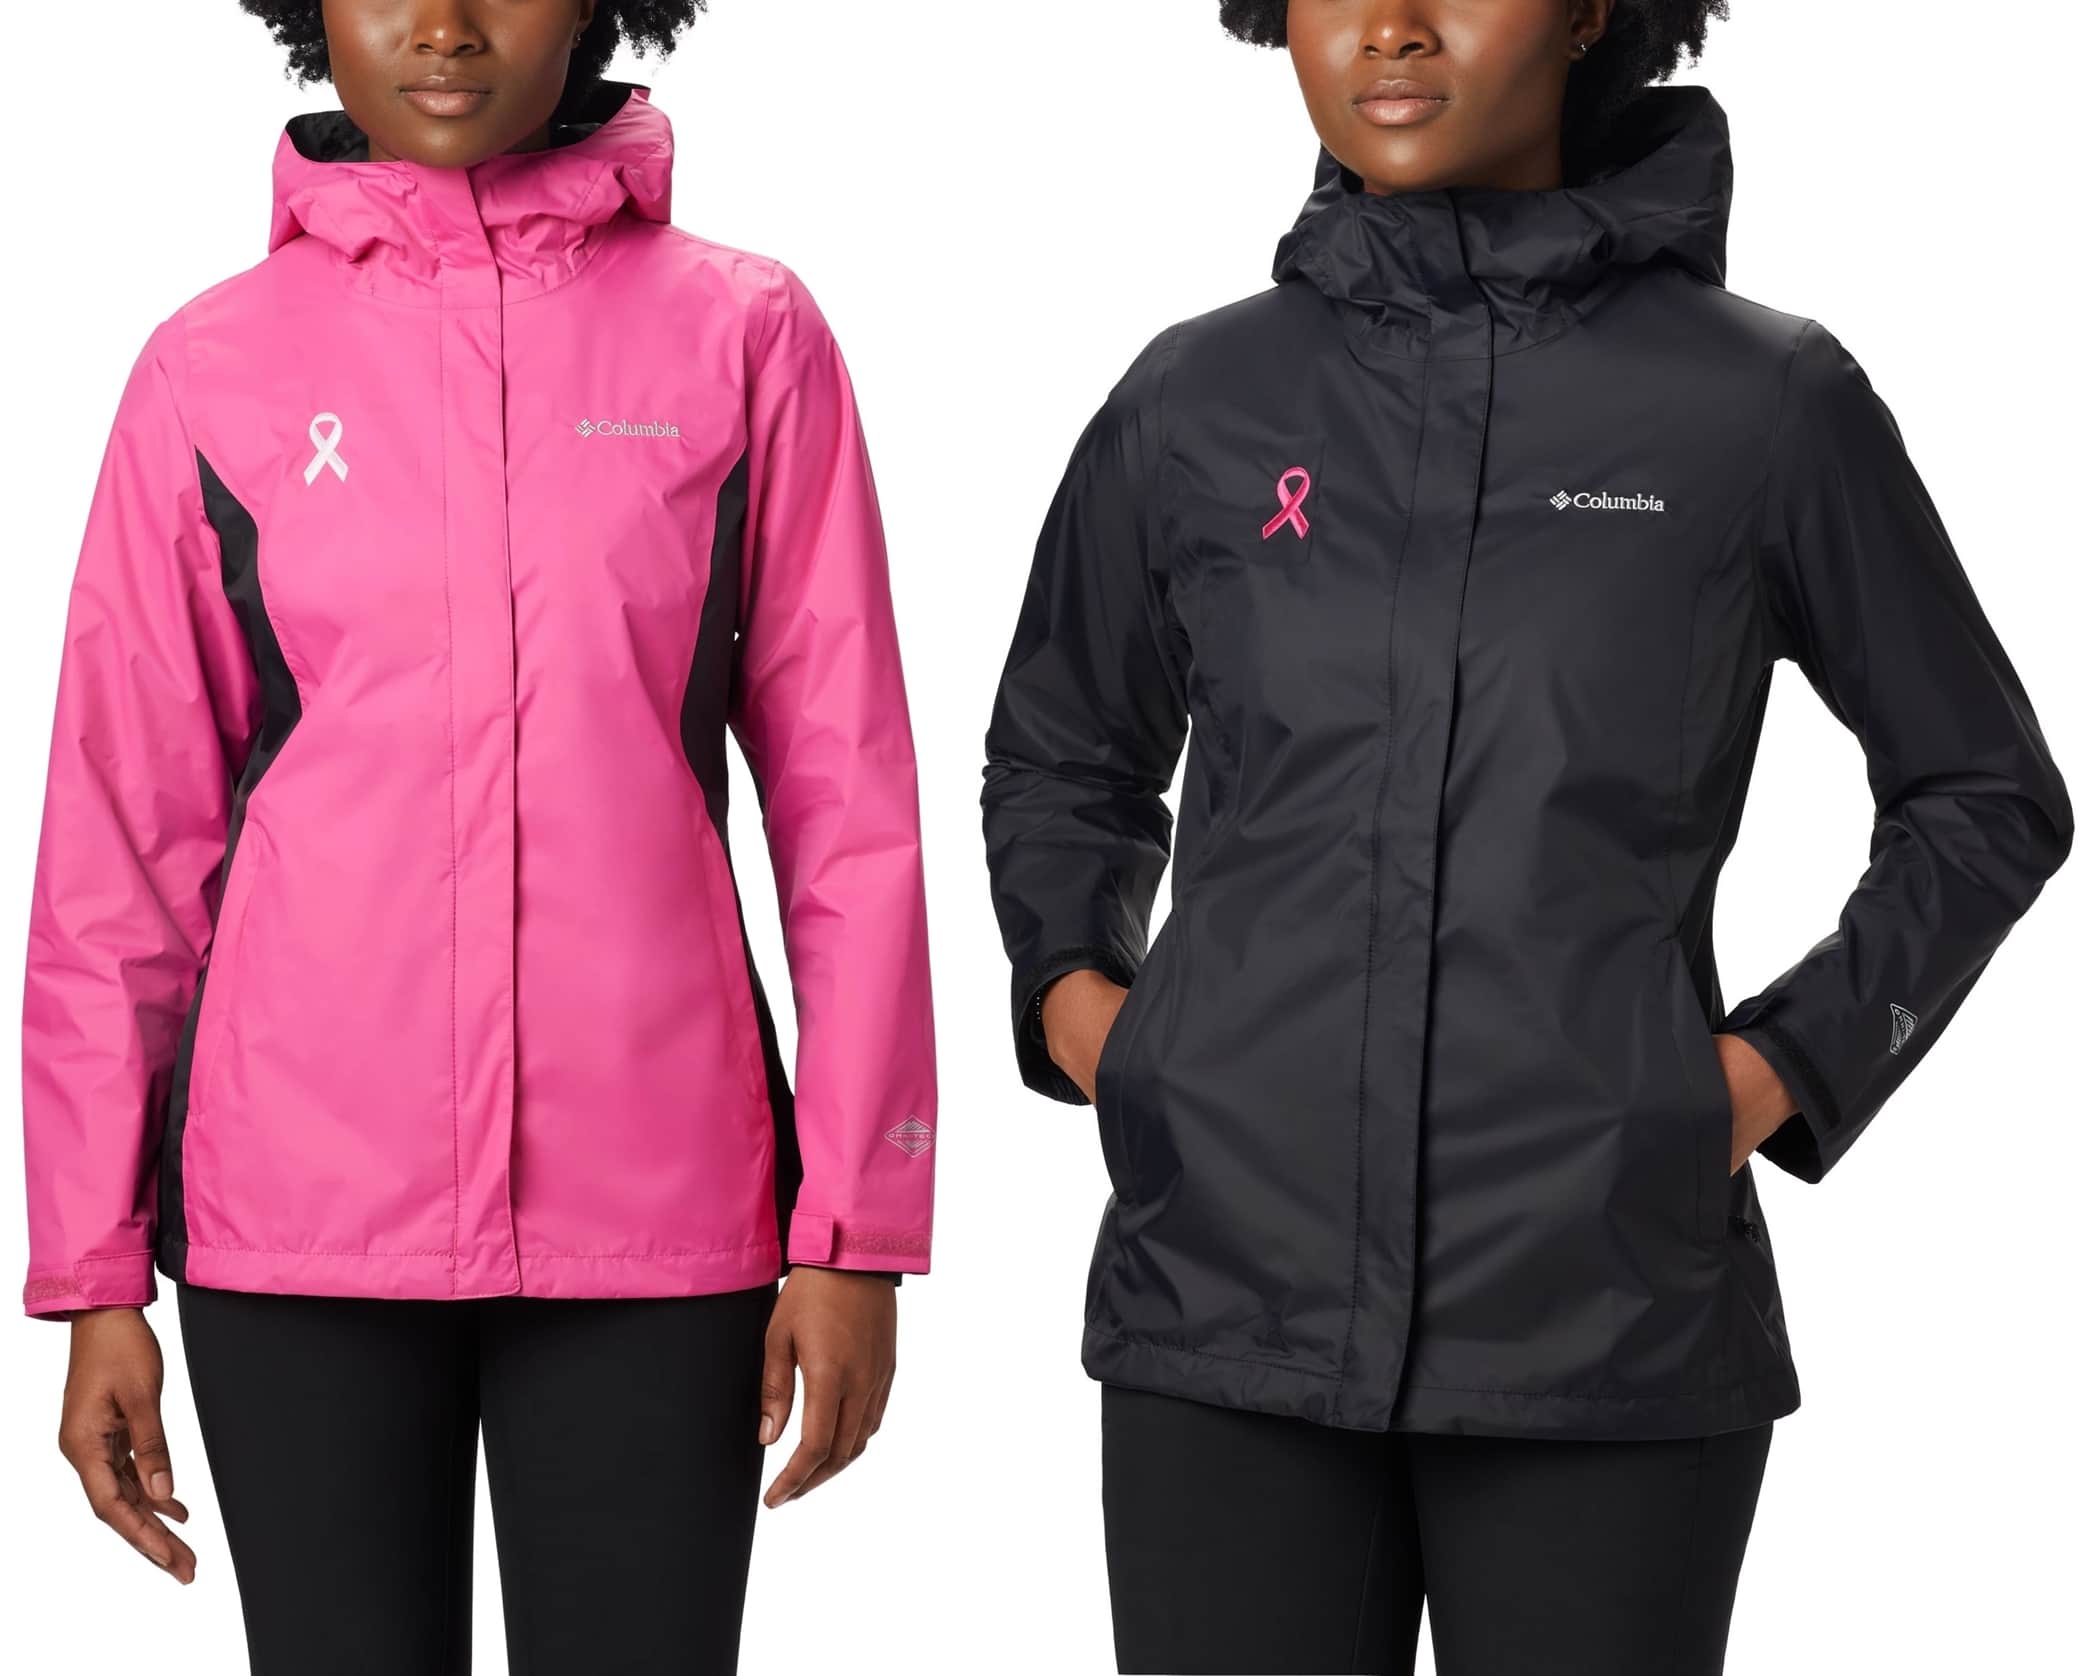 This sleek rain jacket is waterproof, breathable, fully seam-sealed, and so light it packs into its own pocket